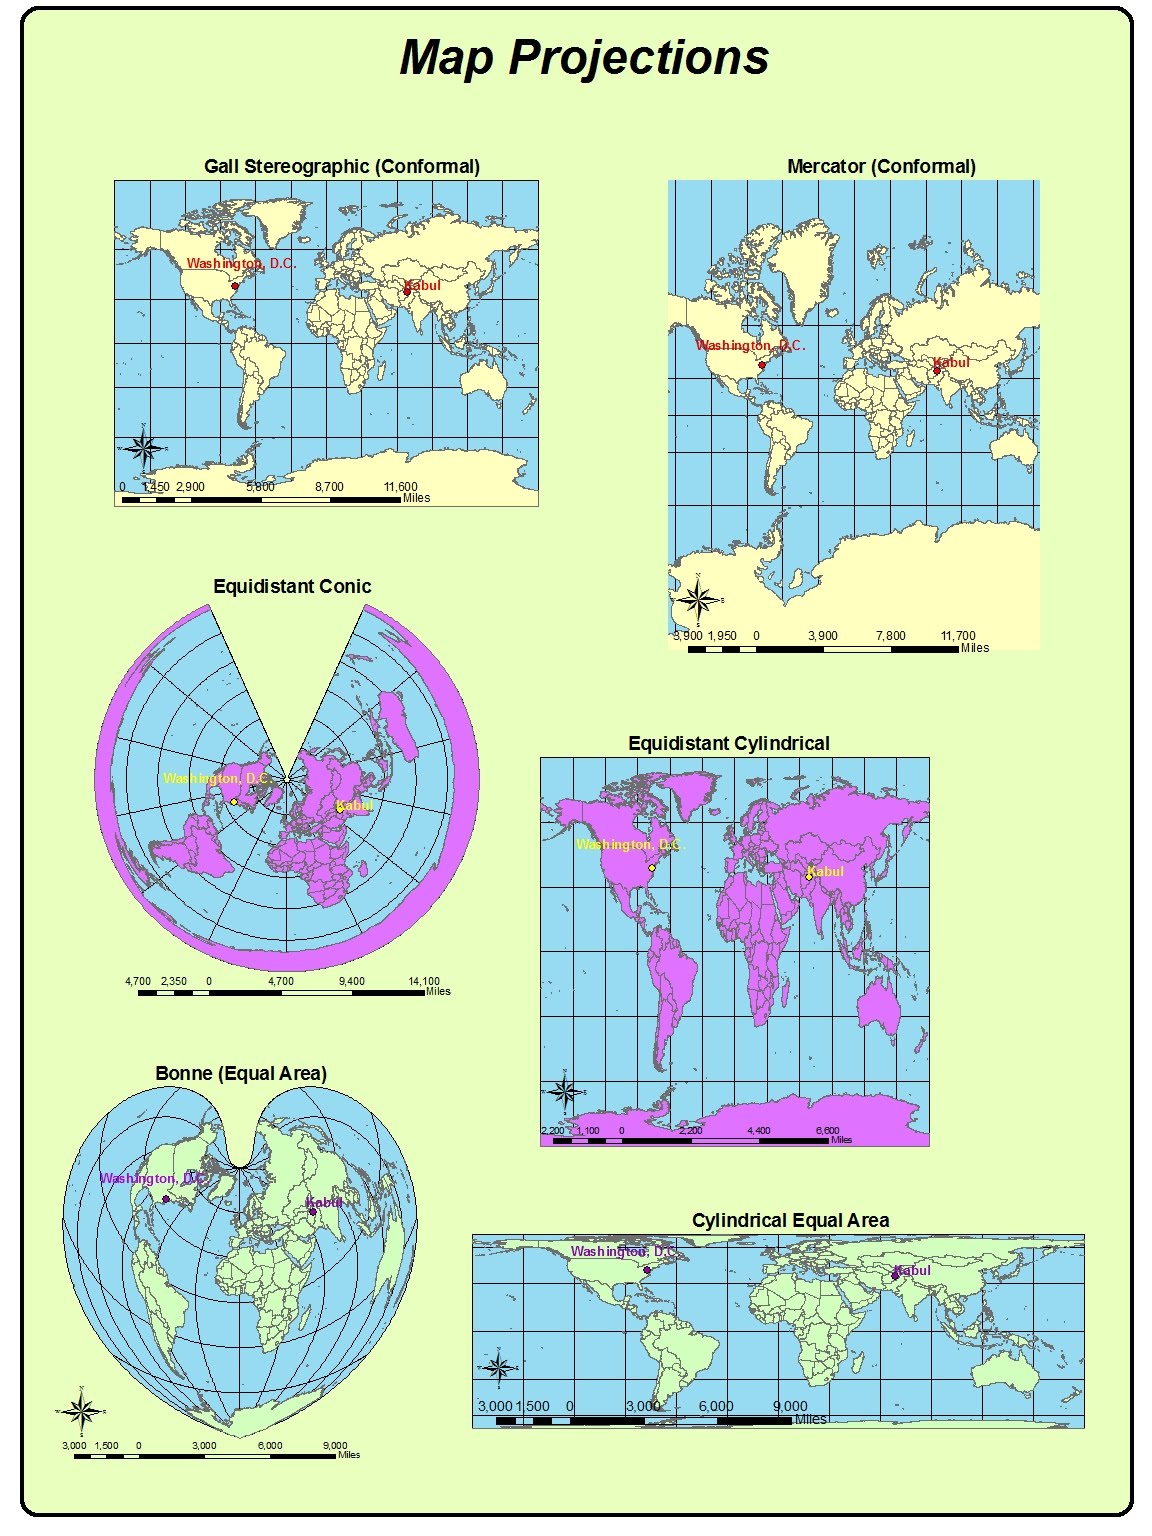 James Antisdel: Geography 7 Blog: Lab 5: Map Projections